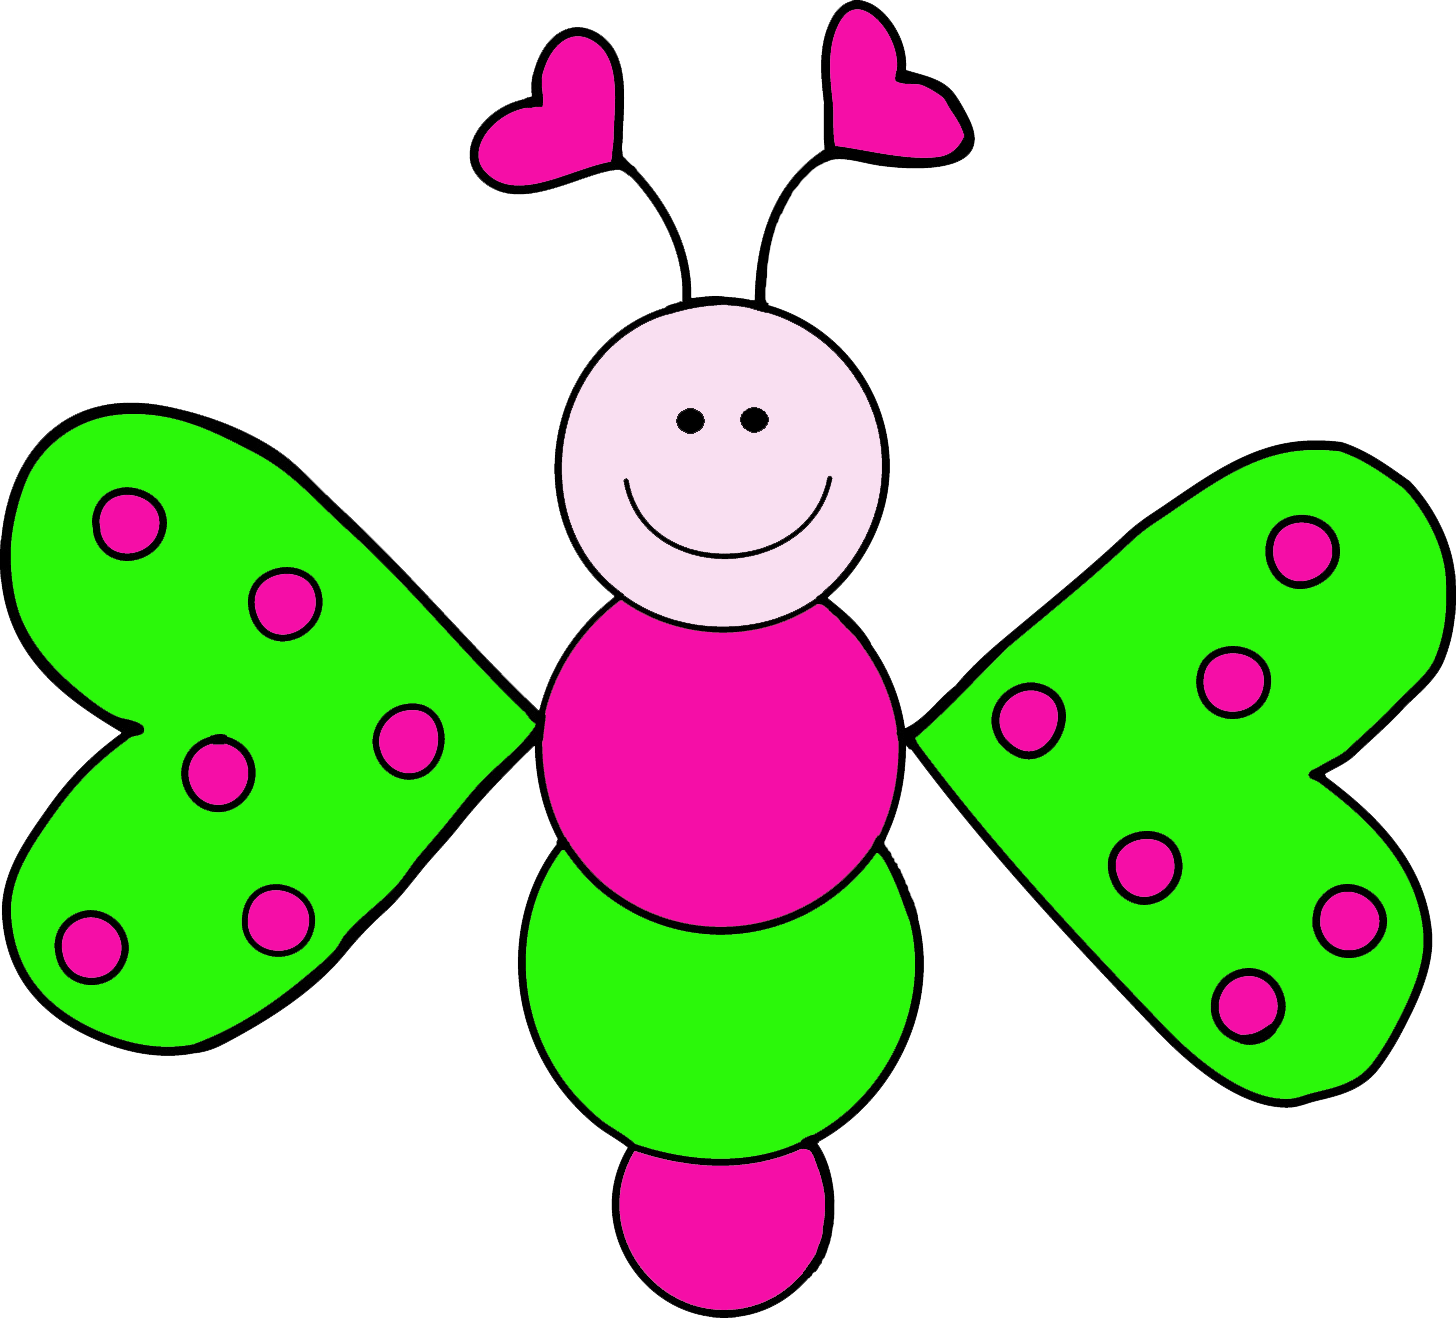 winged insects clipart - photo #37